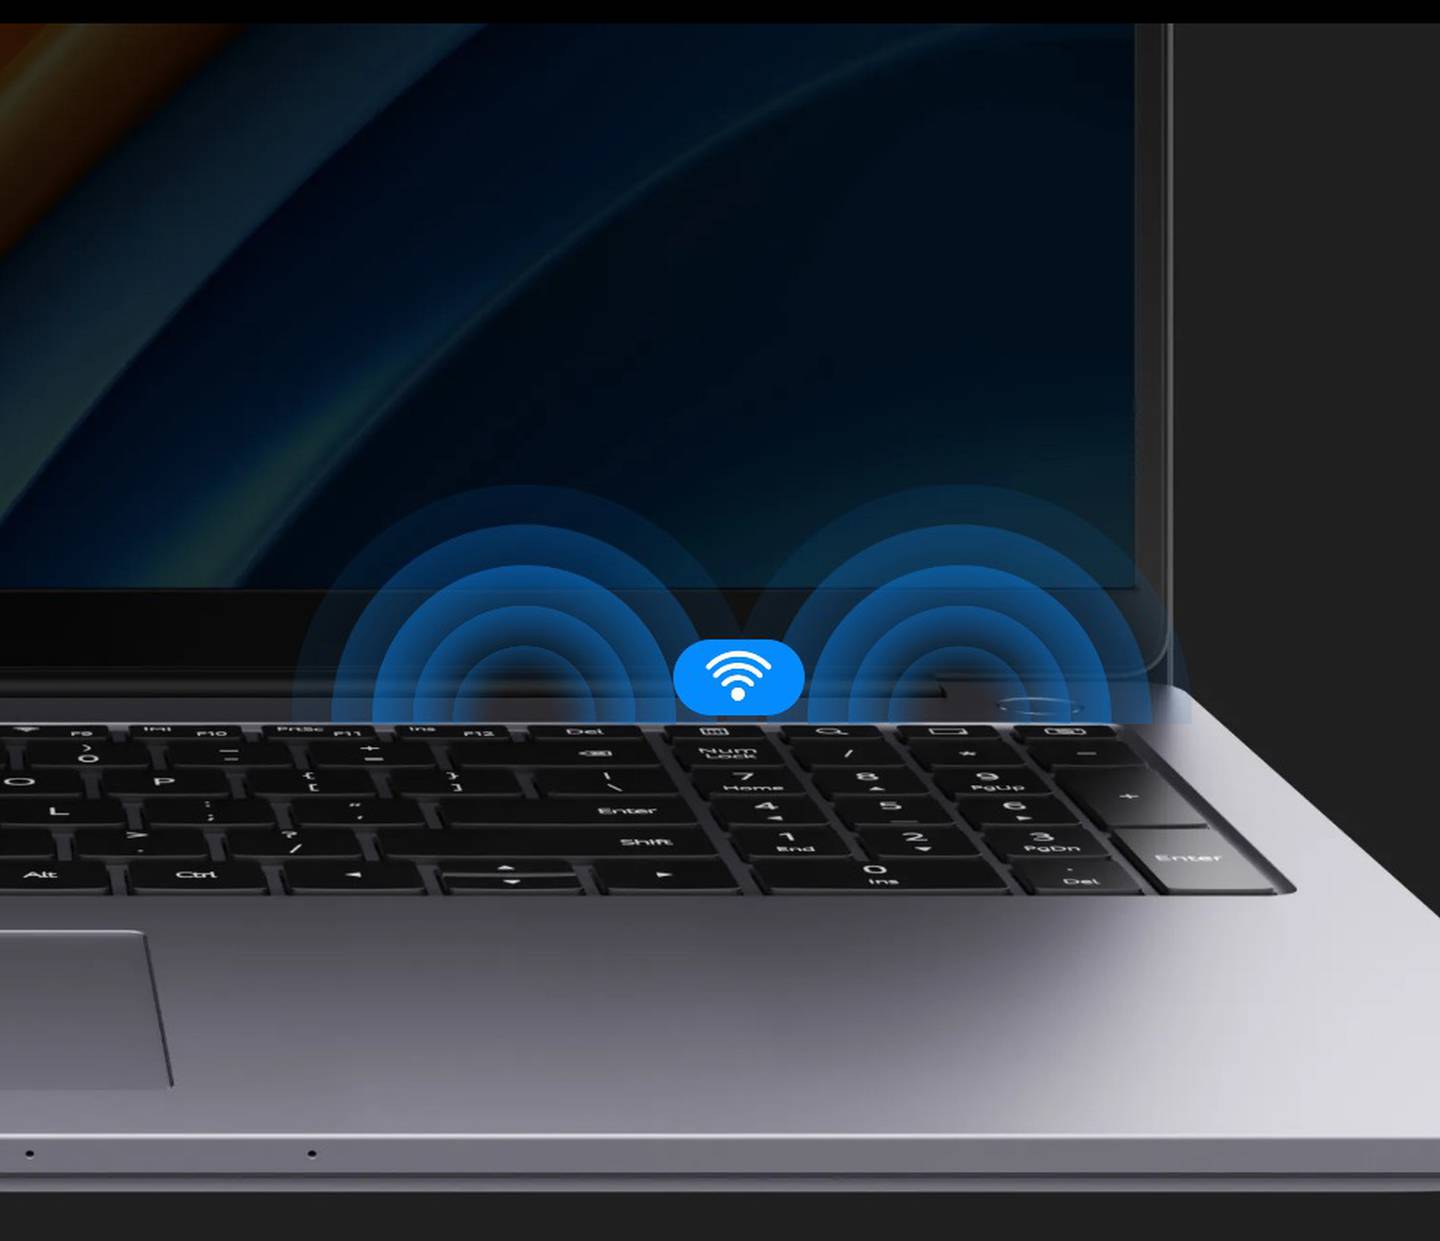 MateBook 16 is a lightweight laptop with high performance and good design.  For those professionals looking for connectivity, speed and efficiency in a team, ideal for hybrid work and to take your virtual meetings to the next level.